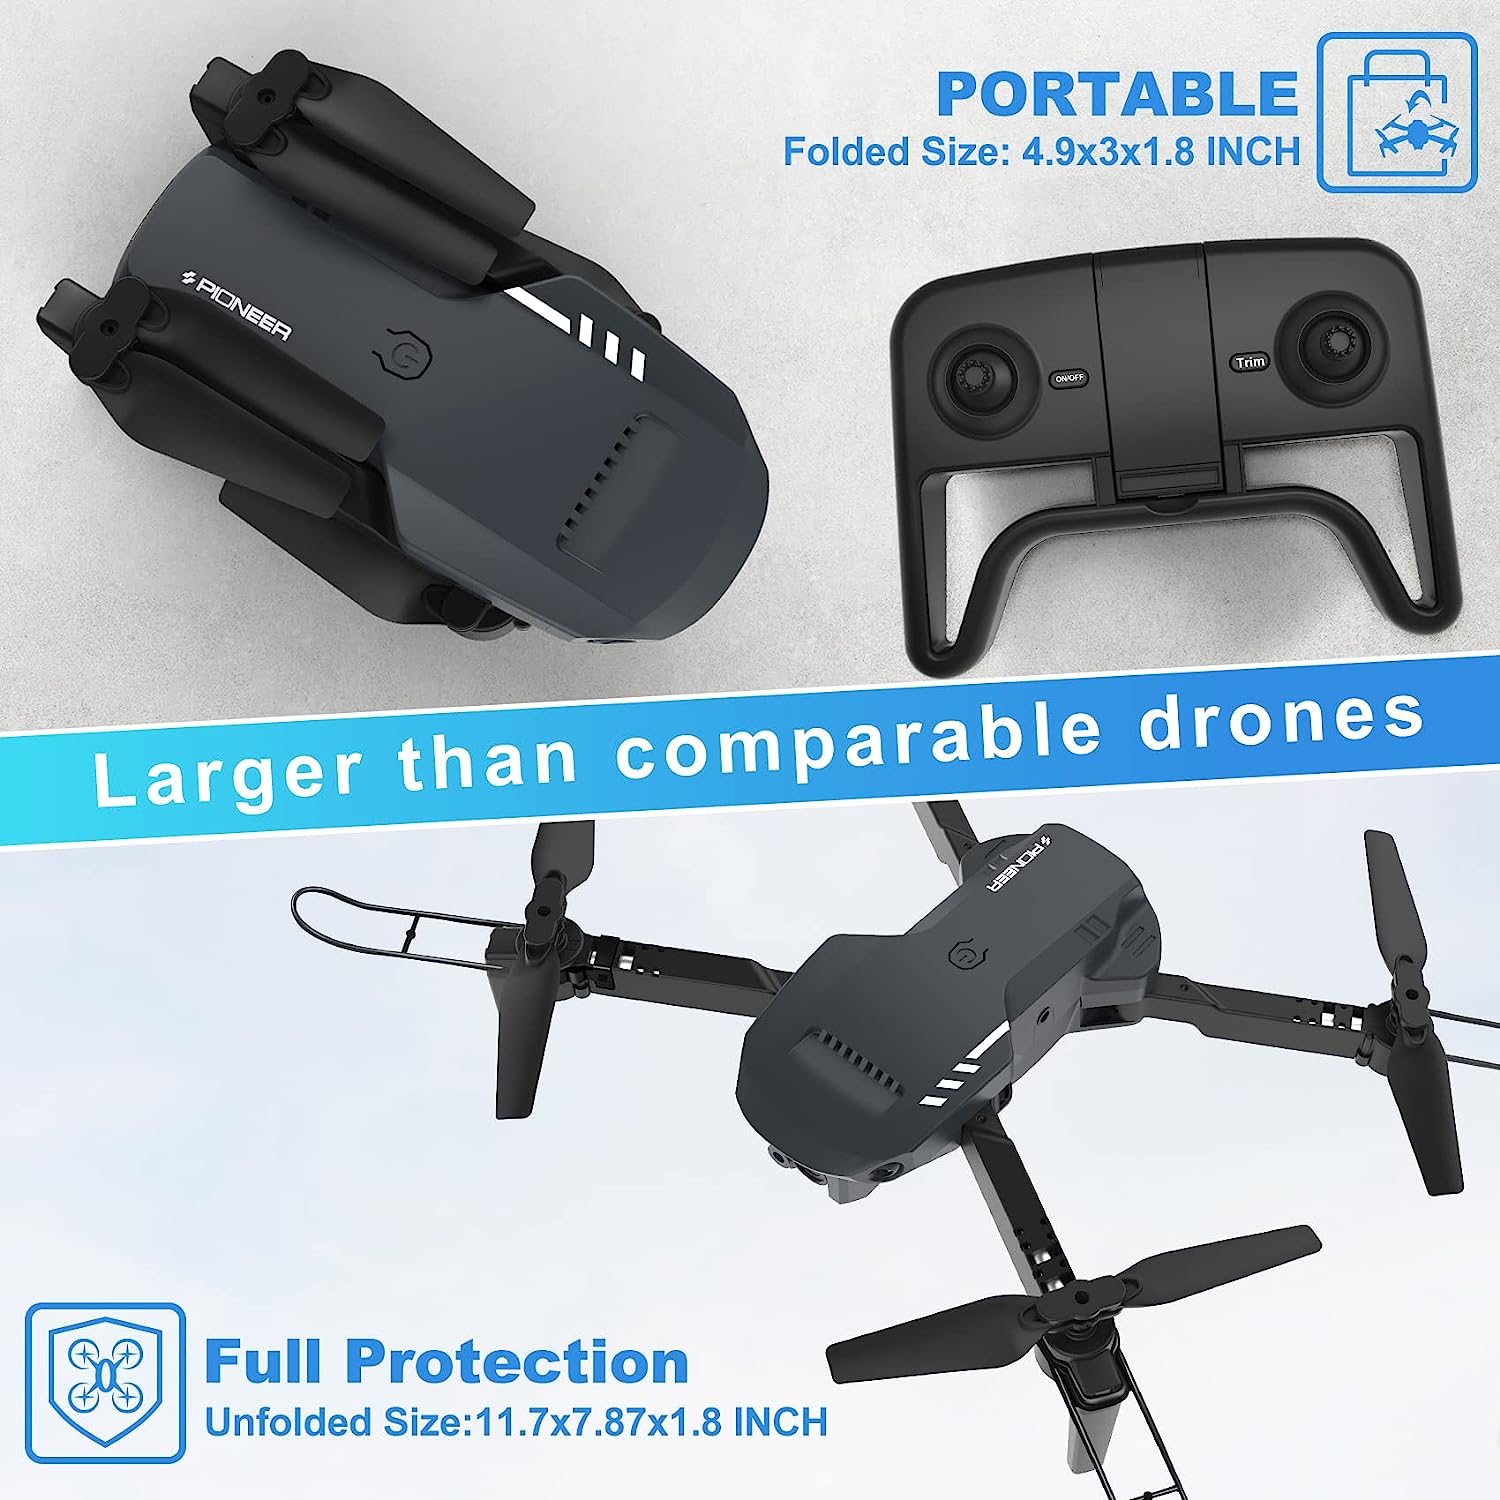 RADCLO Mini Drone with Camera - 1080P HD FPV Foldable Drone with Carrying Circumstance, 2 Batteries, 90° Adjustable Lens, One Key Take Off/Land, Altitude Hold, 360° Flip, Toys Gifts for Kids, Adults, beginners, Remote Controlled, Black